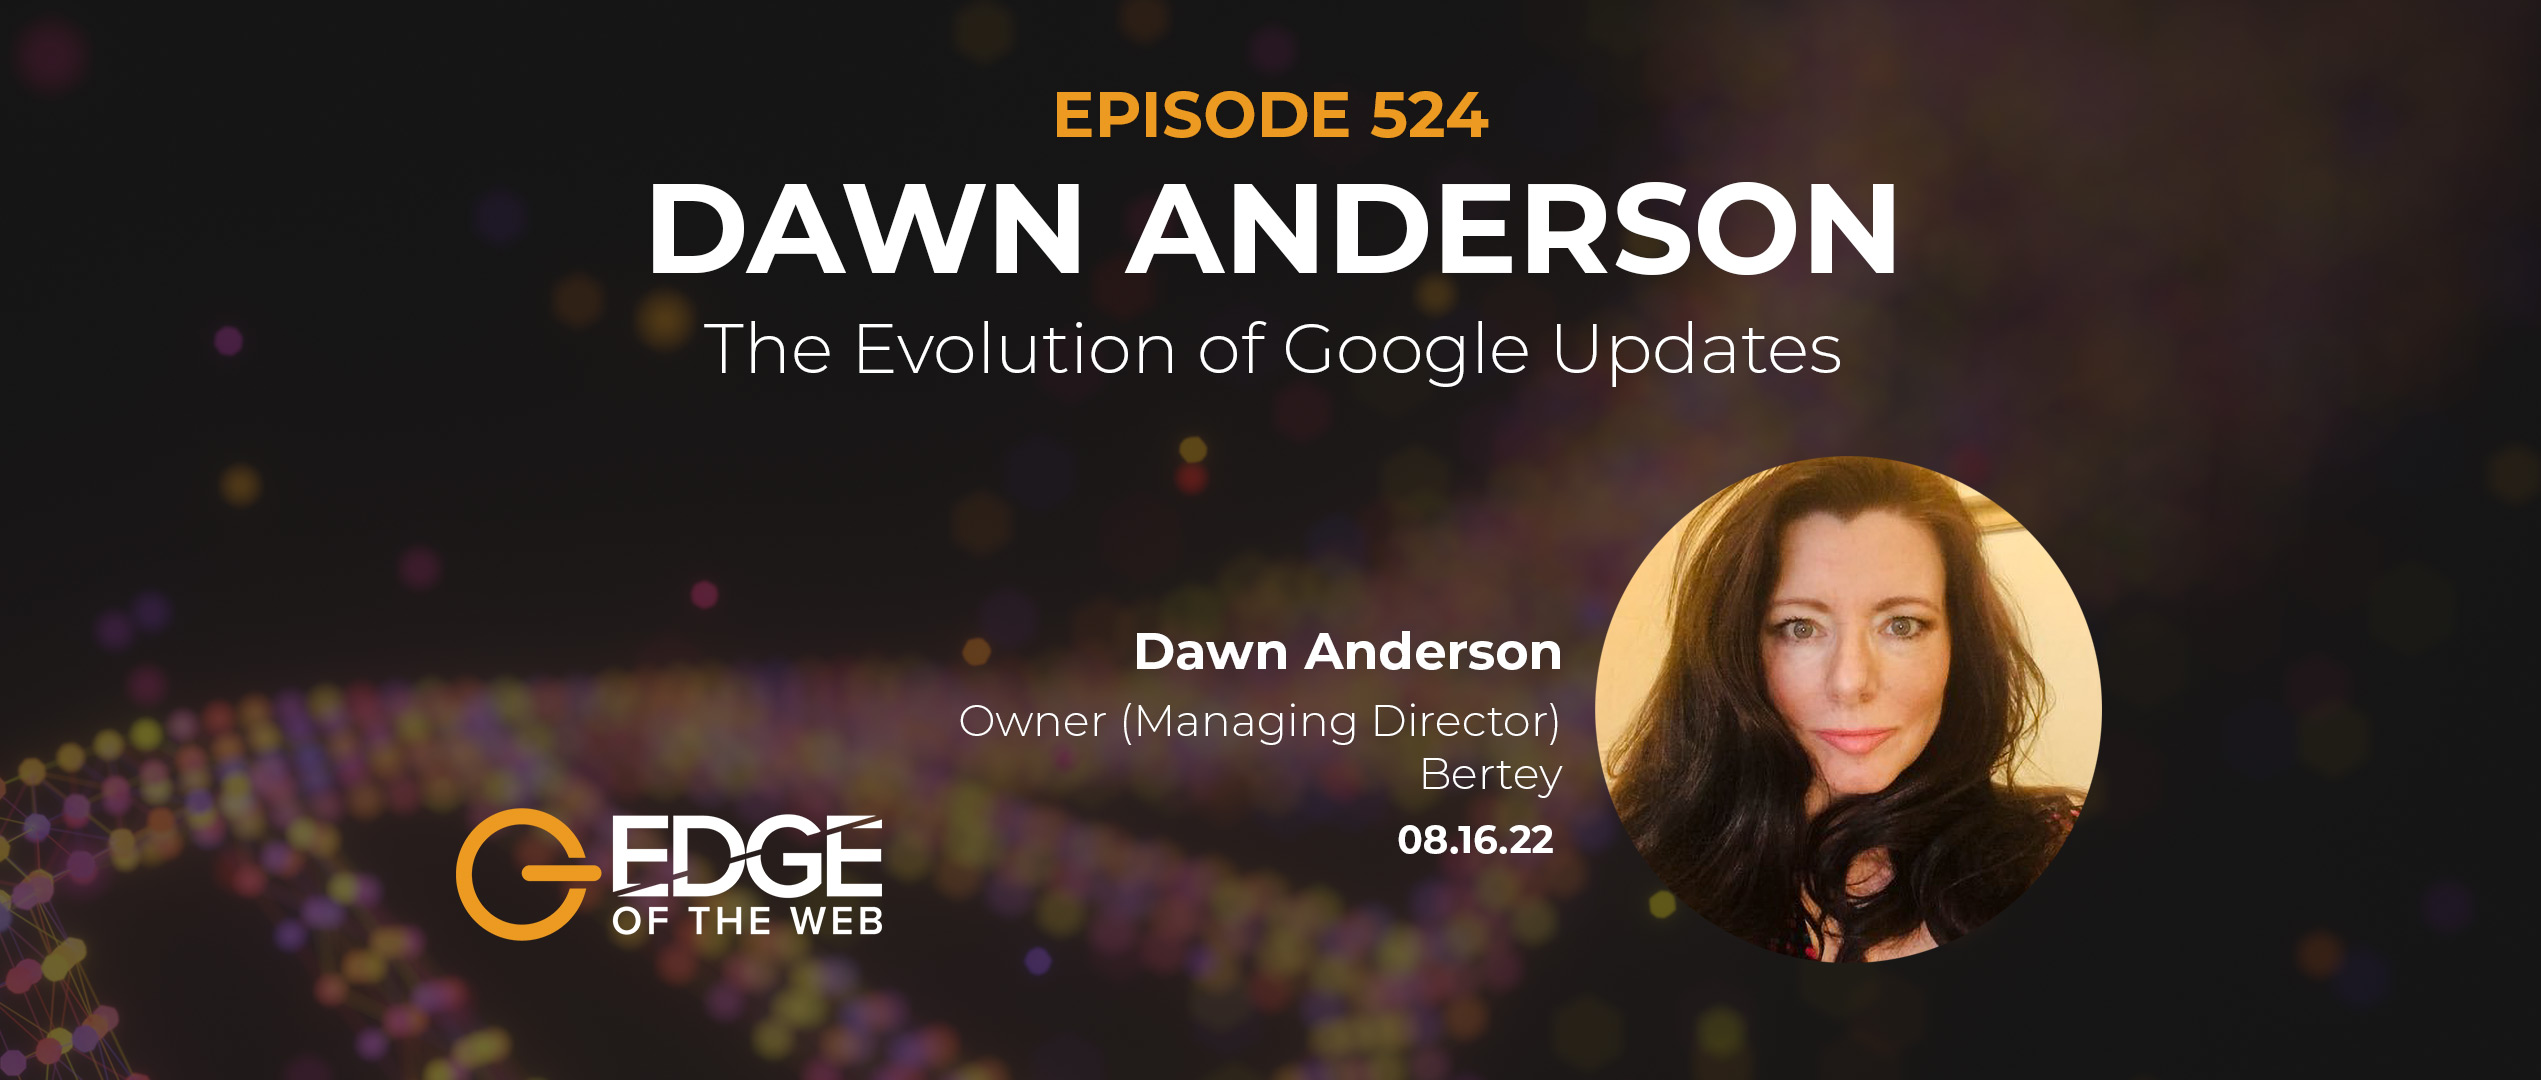 Dawn Anderson EDGE Episode 524 Featured Image